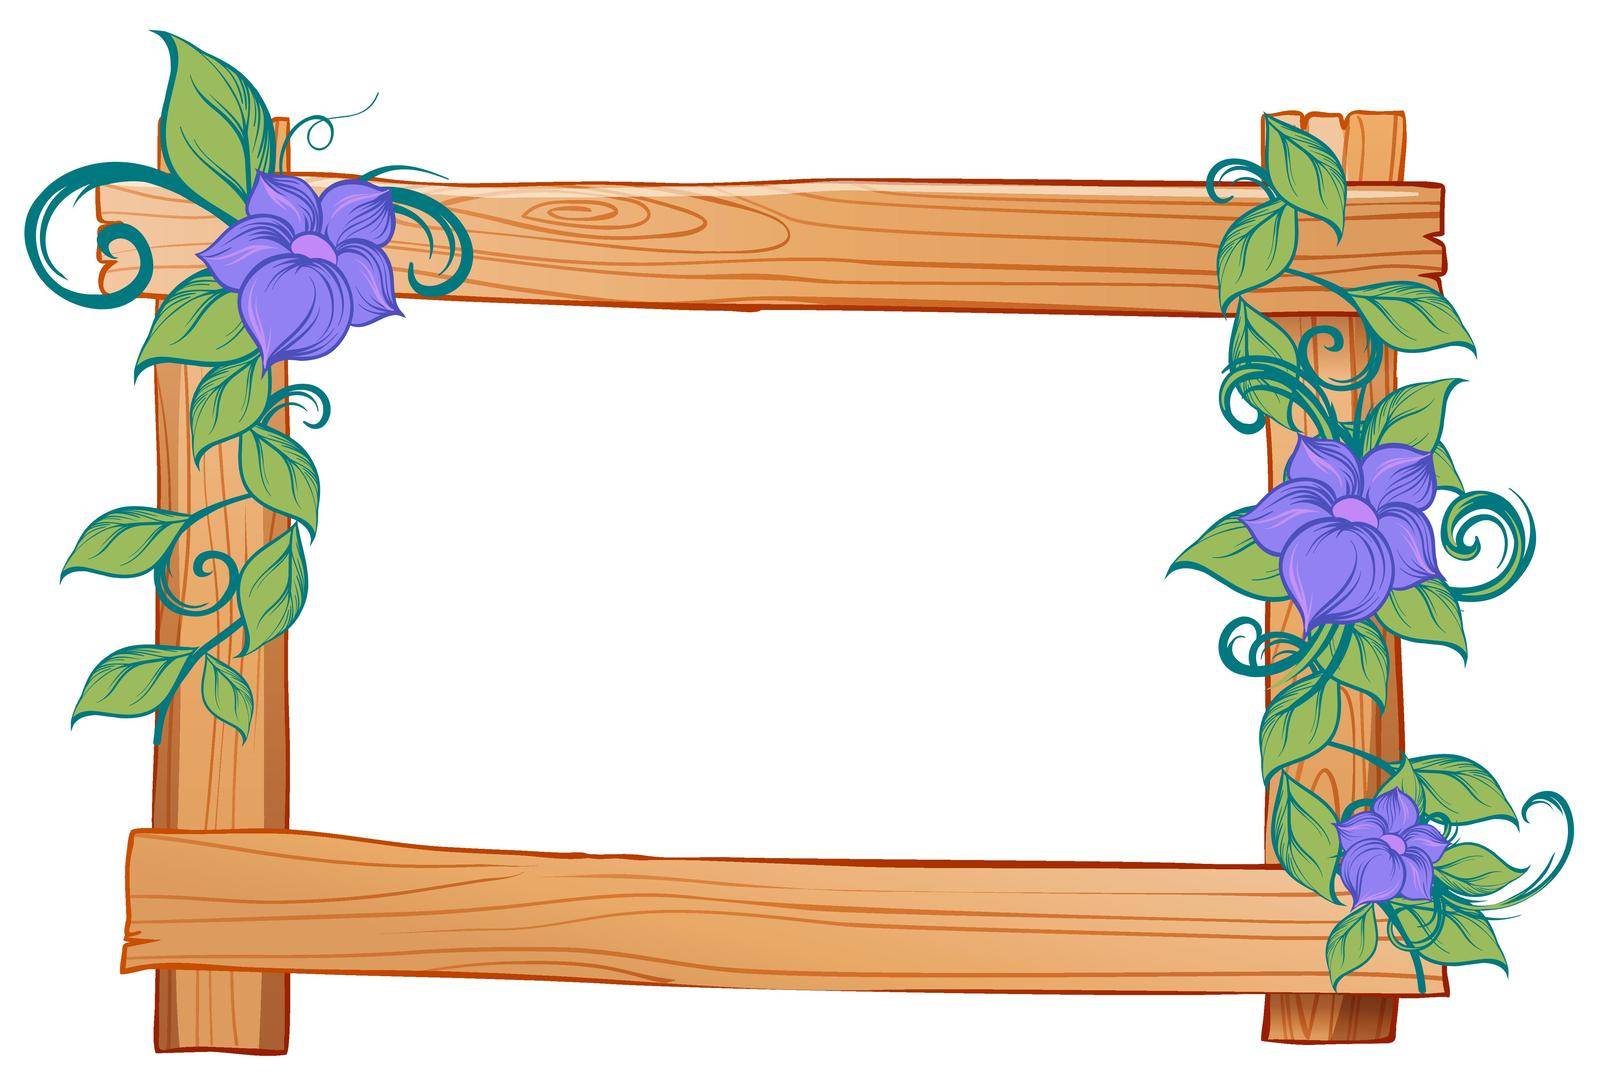 Wooden frame with purple flowers on the sides